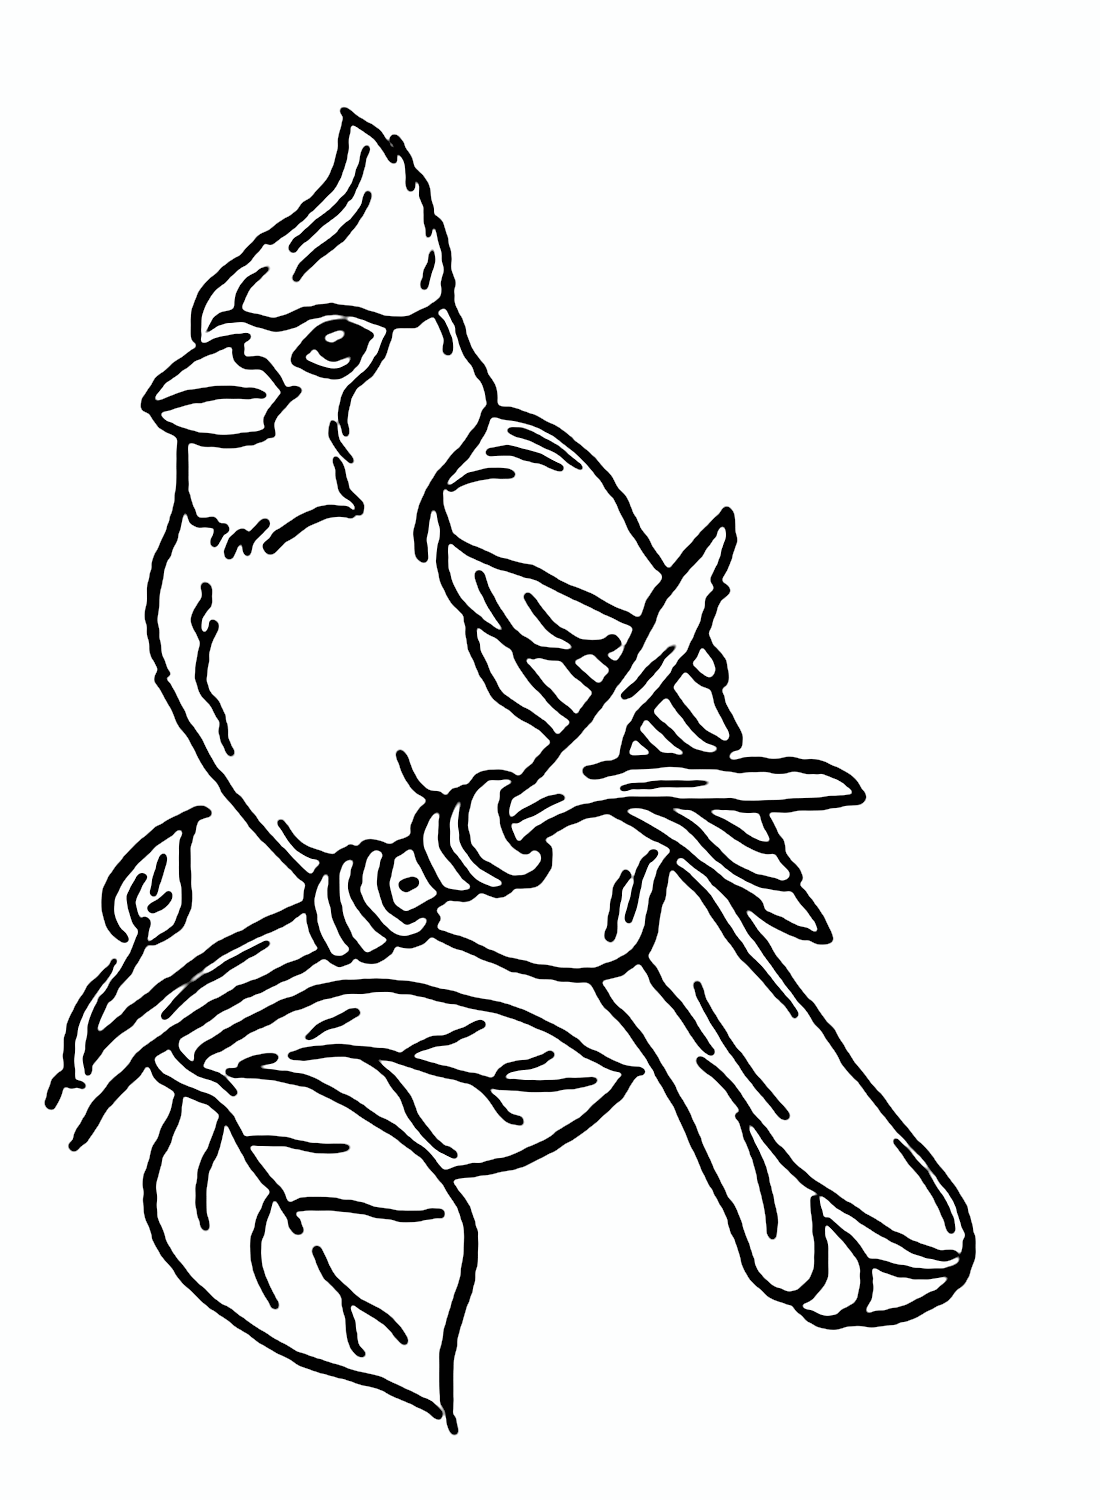 Cardinal coloring pages printable for free download